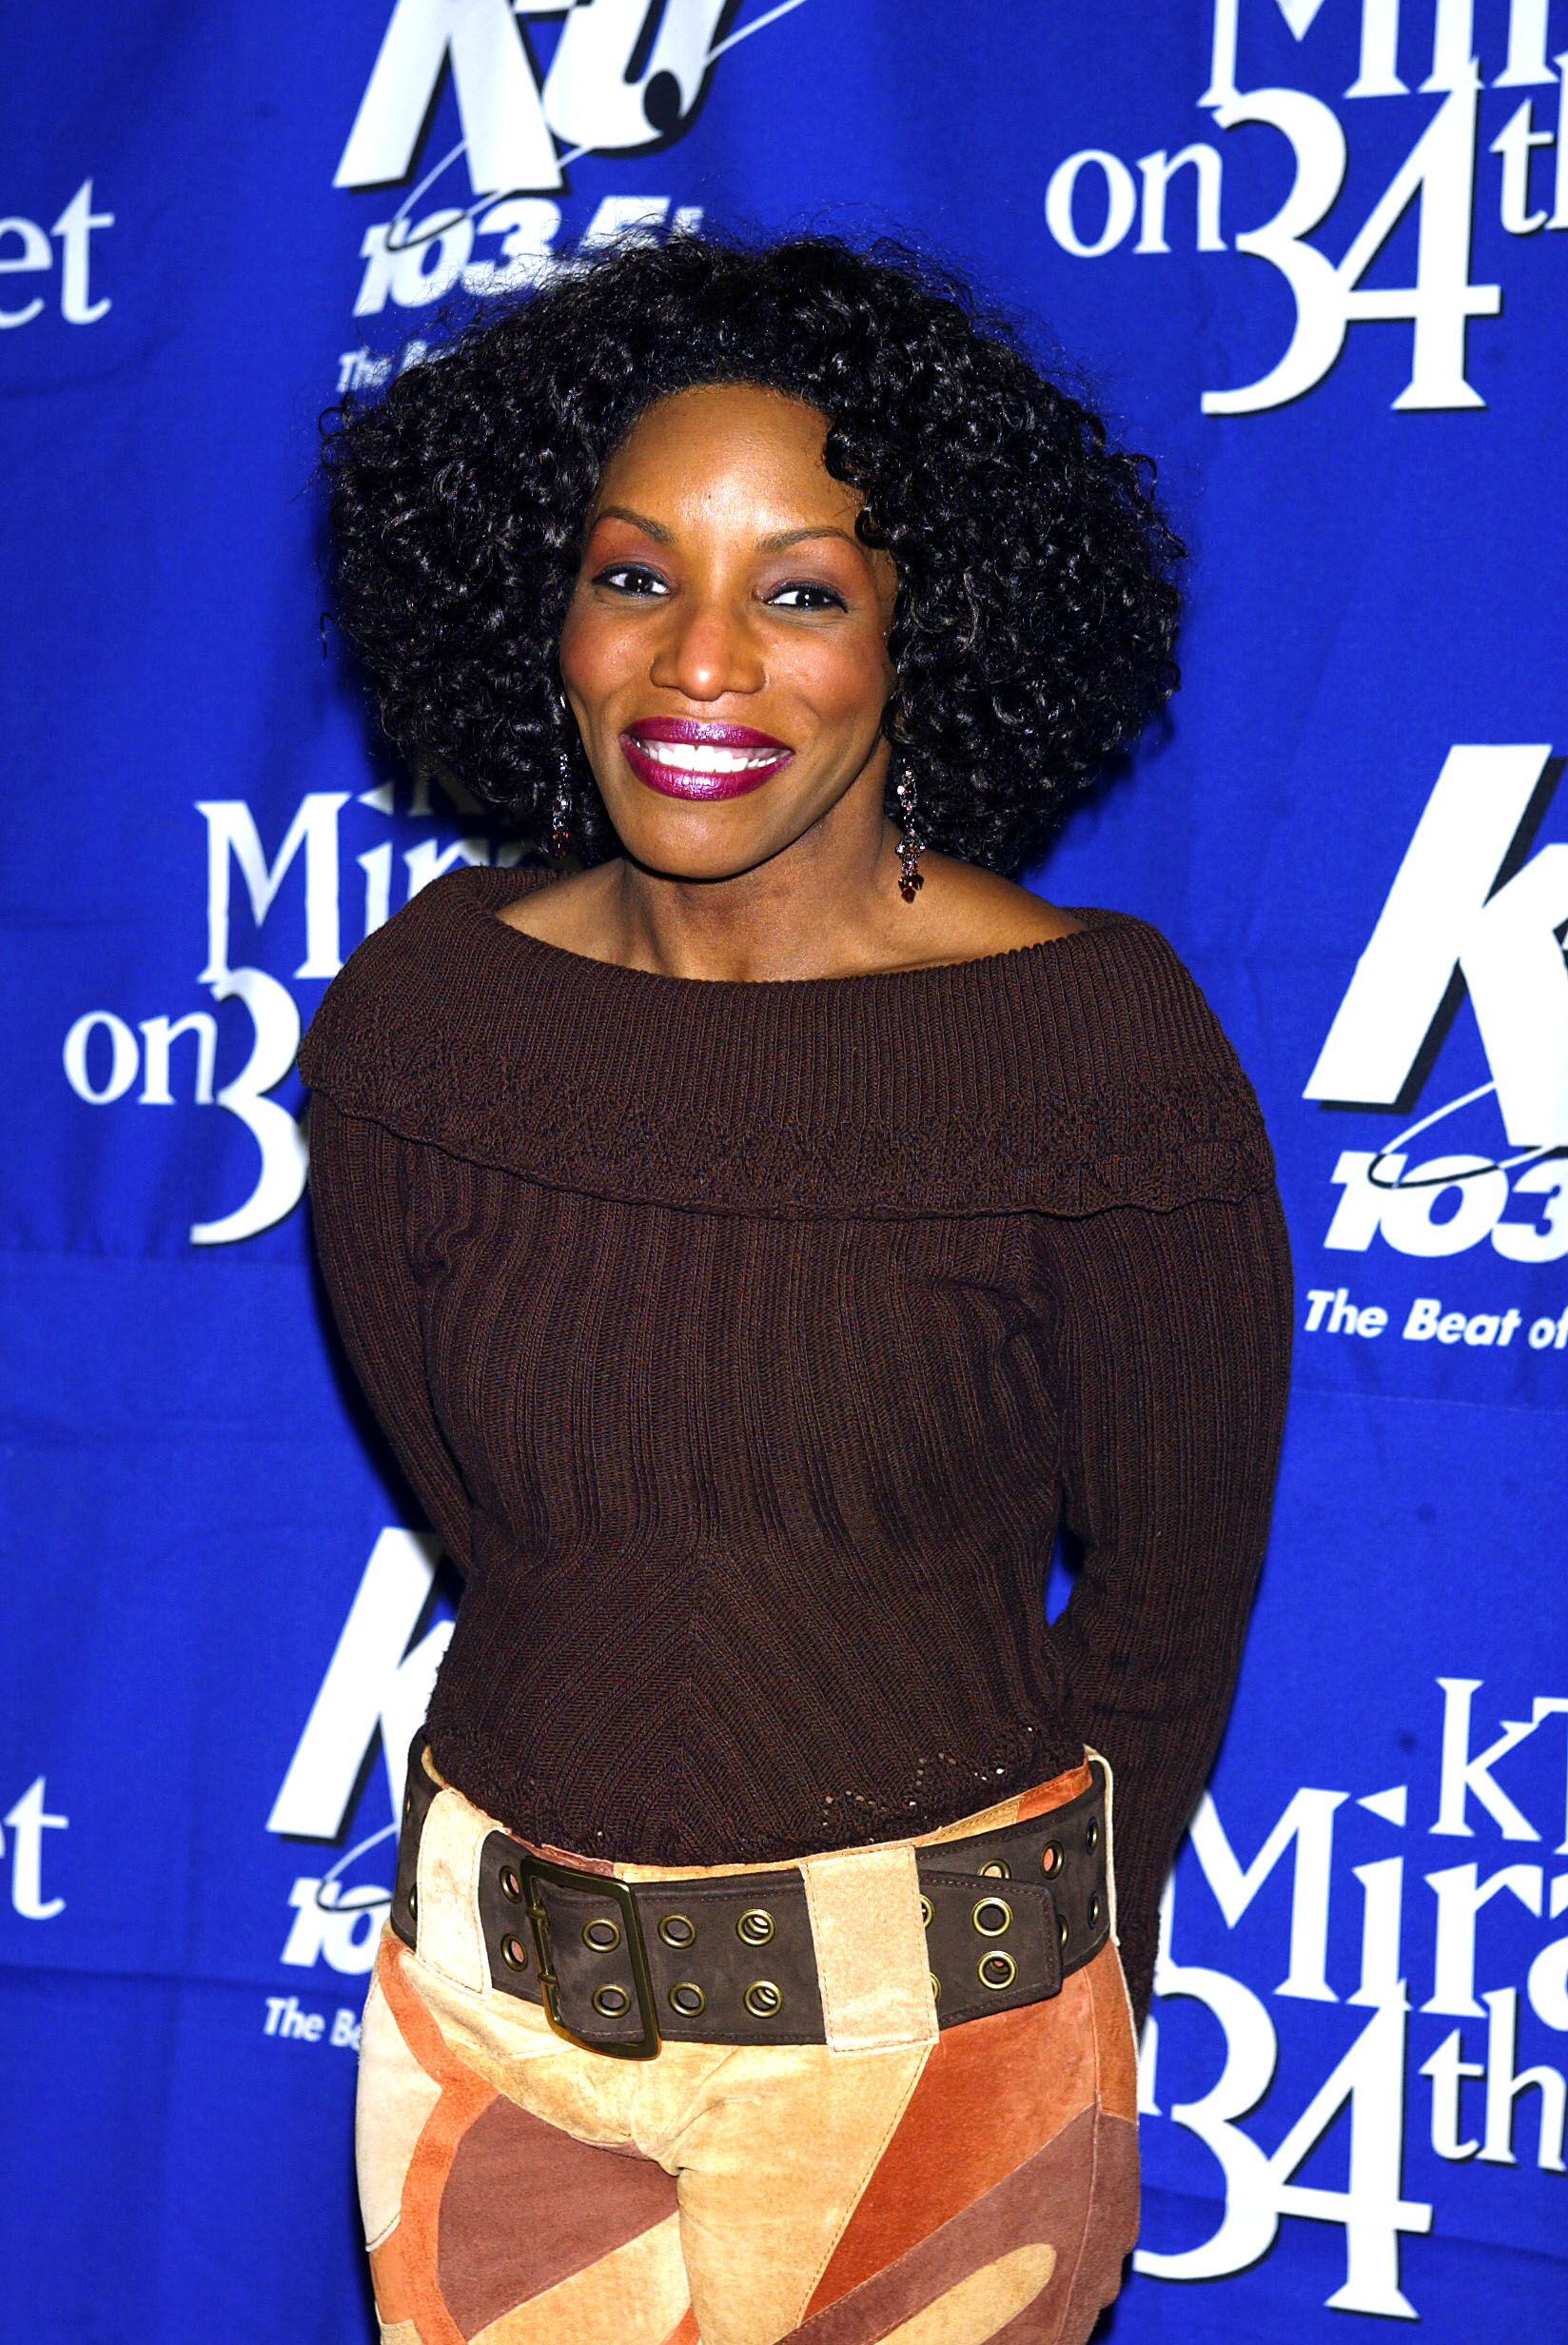 Stephanie Mills backstage during "KTU's Miracle on 34th Street" hoilday concert at Madison Square Garden in New York City. December 18, 2002 | Photo: Getty Images